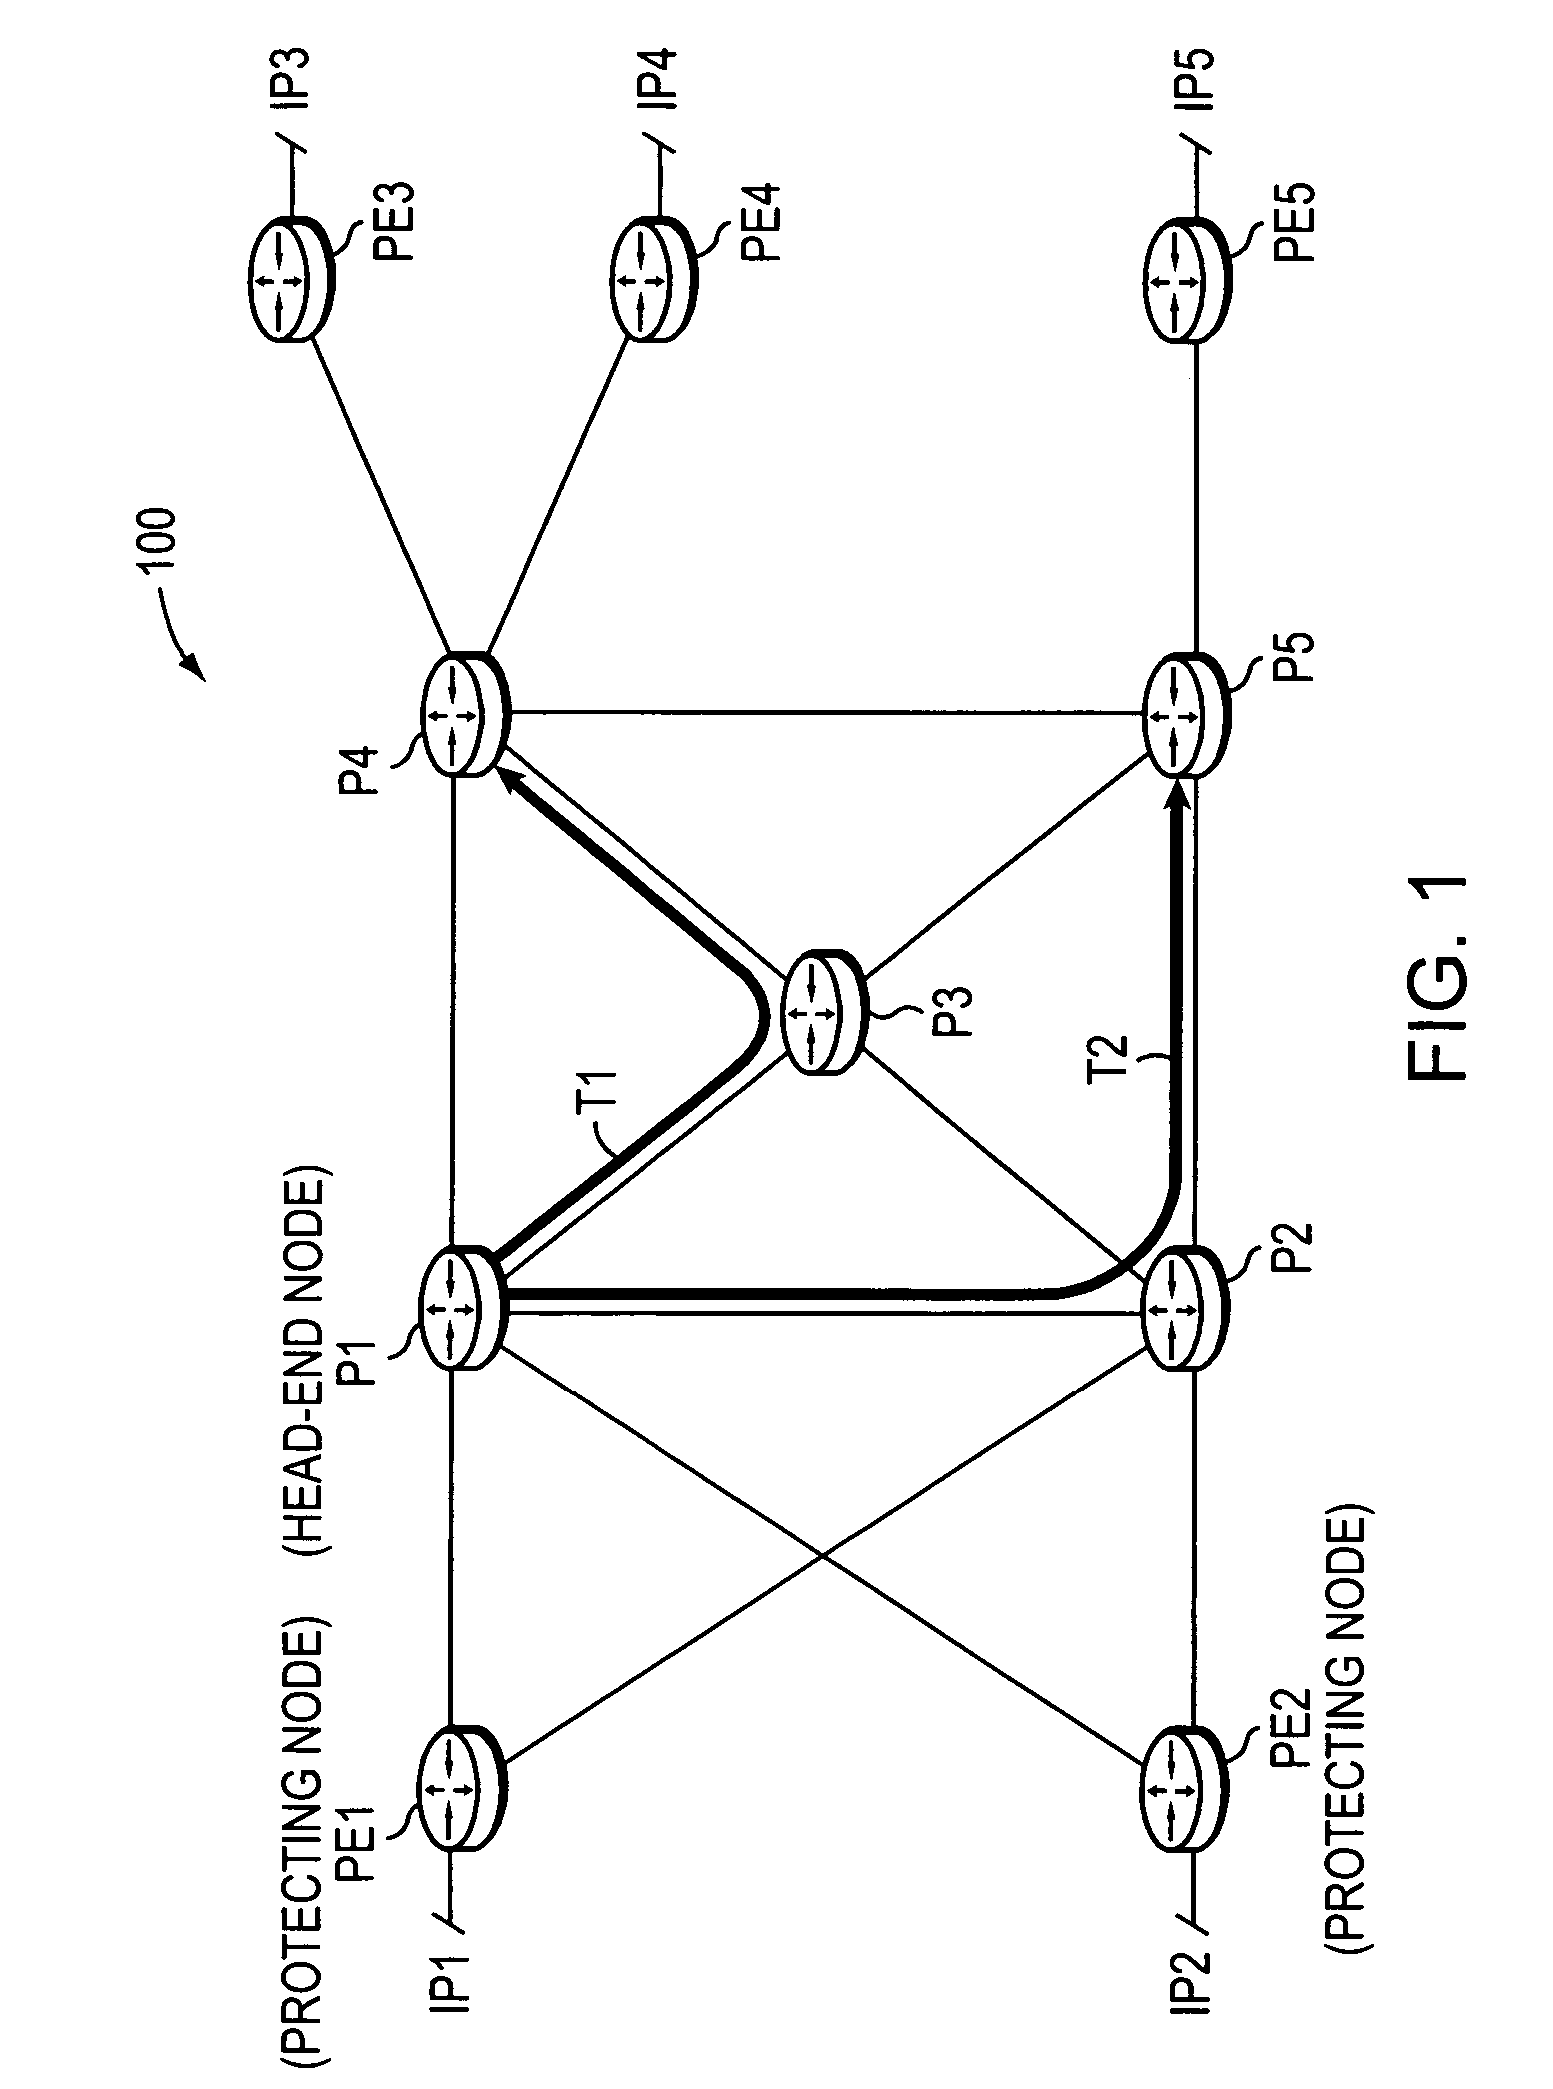 Dynamic protection against failure of a head-end node of one or more TE-LSPs